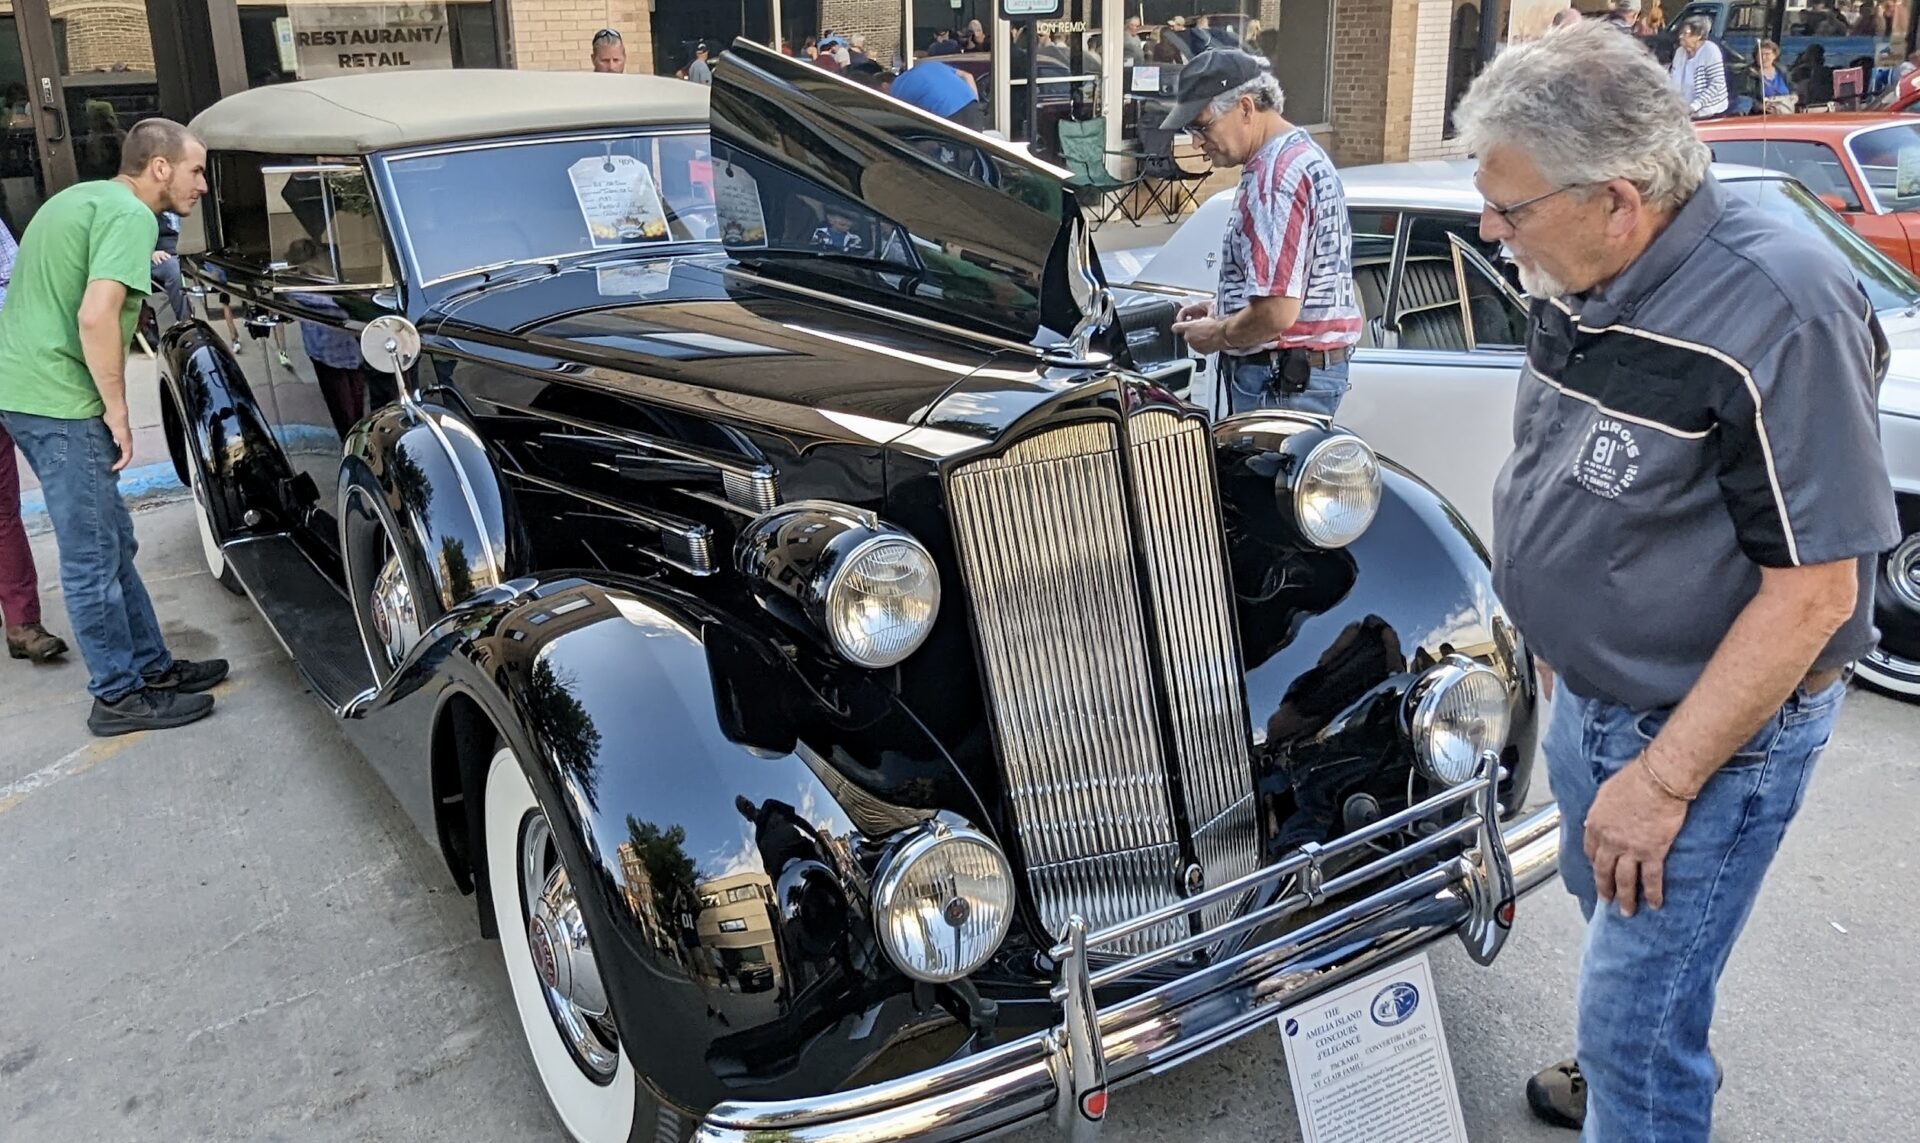 A Packard was popular with people who attended the Sizzlin' Summer Nights car and bike show downtown on Saturday, Aug. 26. Aberdeen Insider photo by Scott Waltman